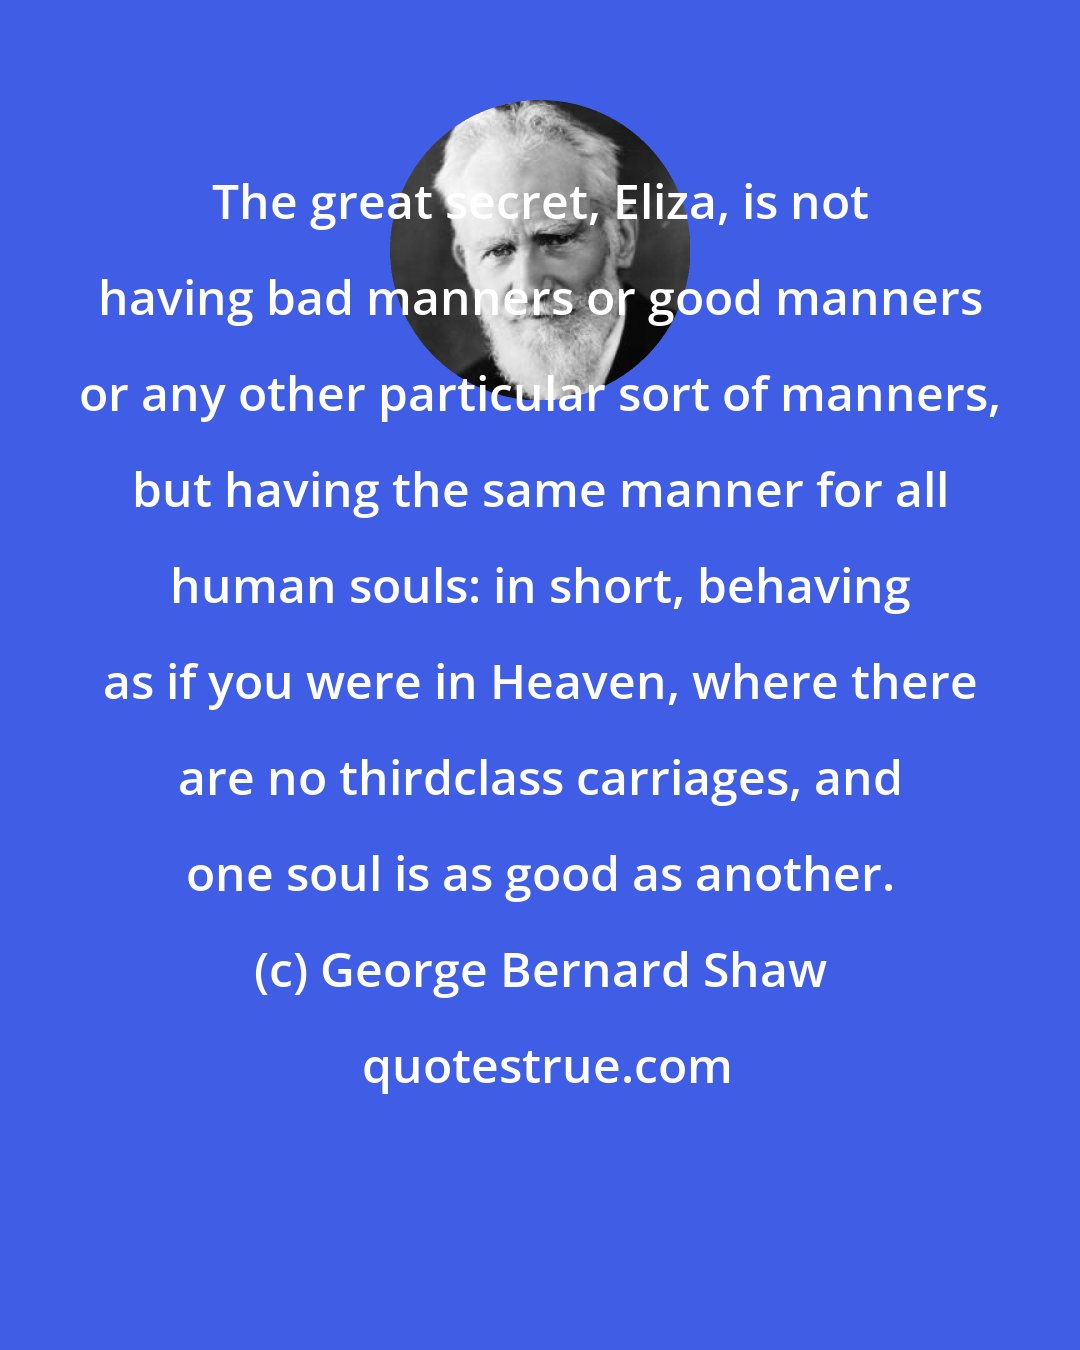 George Bernard Shaw: The great secret, Eliza, is not having bad manners or good manners or any other particular sort of manners, but having the same manner for all human souls: in short, behaving as if you were in Heaven, where there are no thirdclass carriages, and one soul is as good as another.